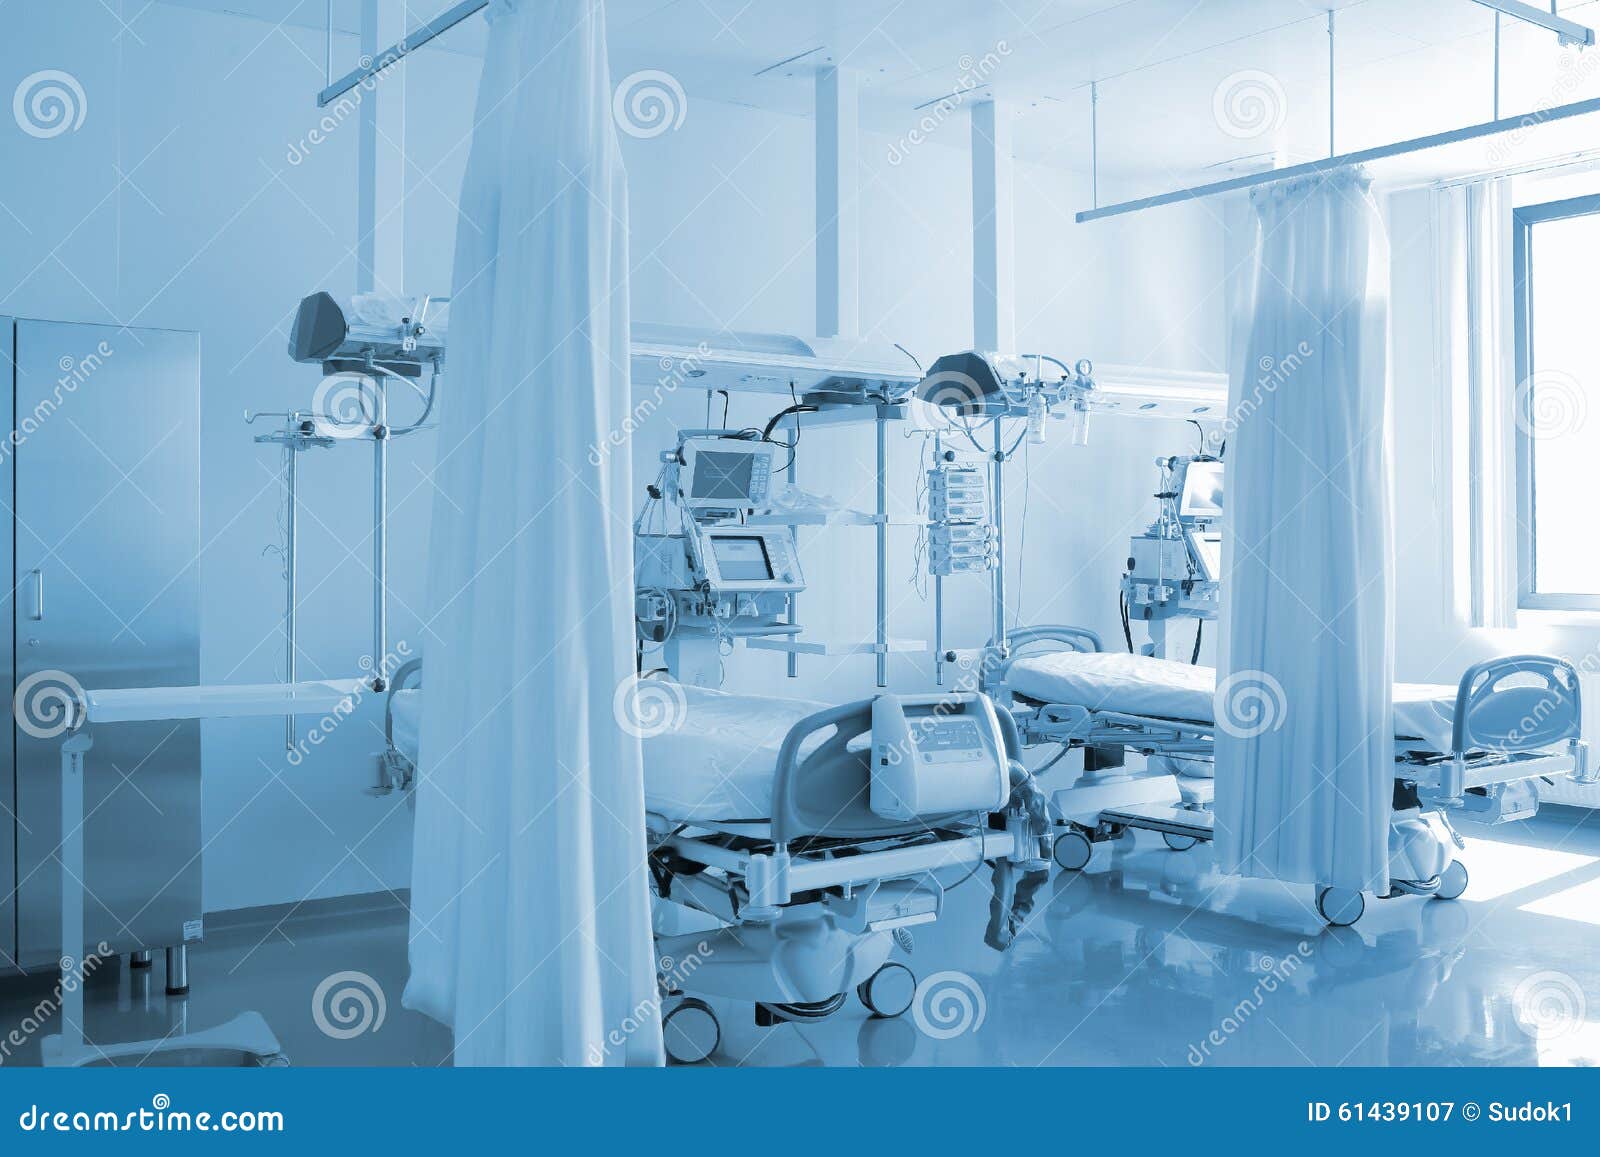 empty bed in personalized ward